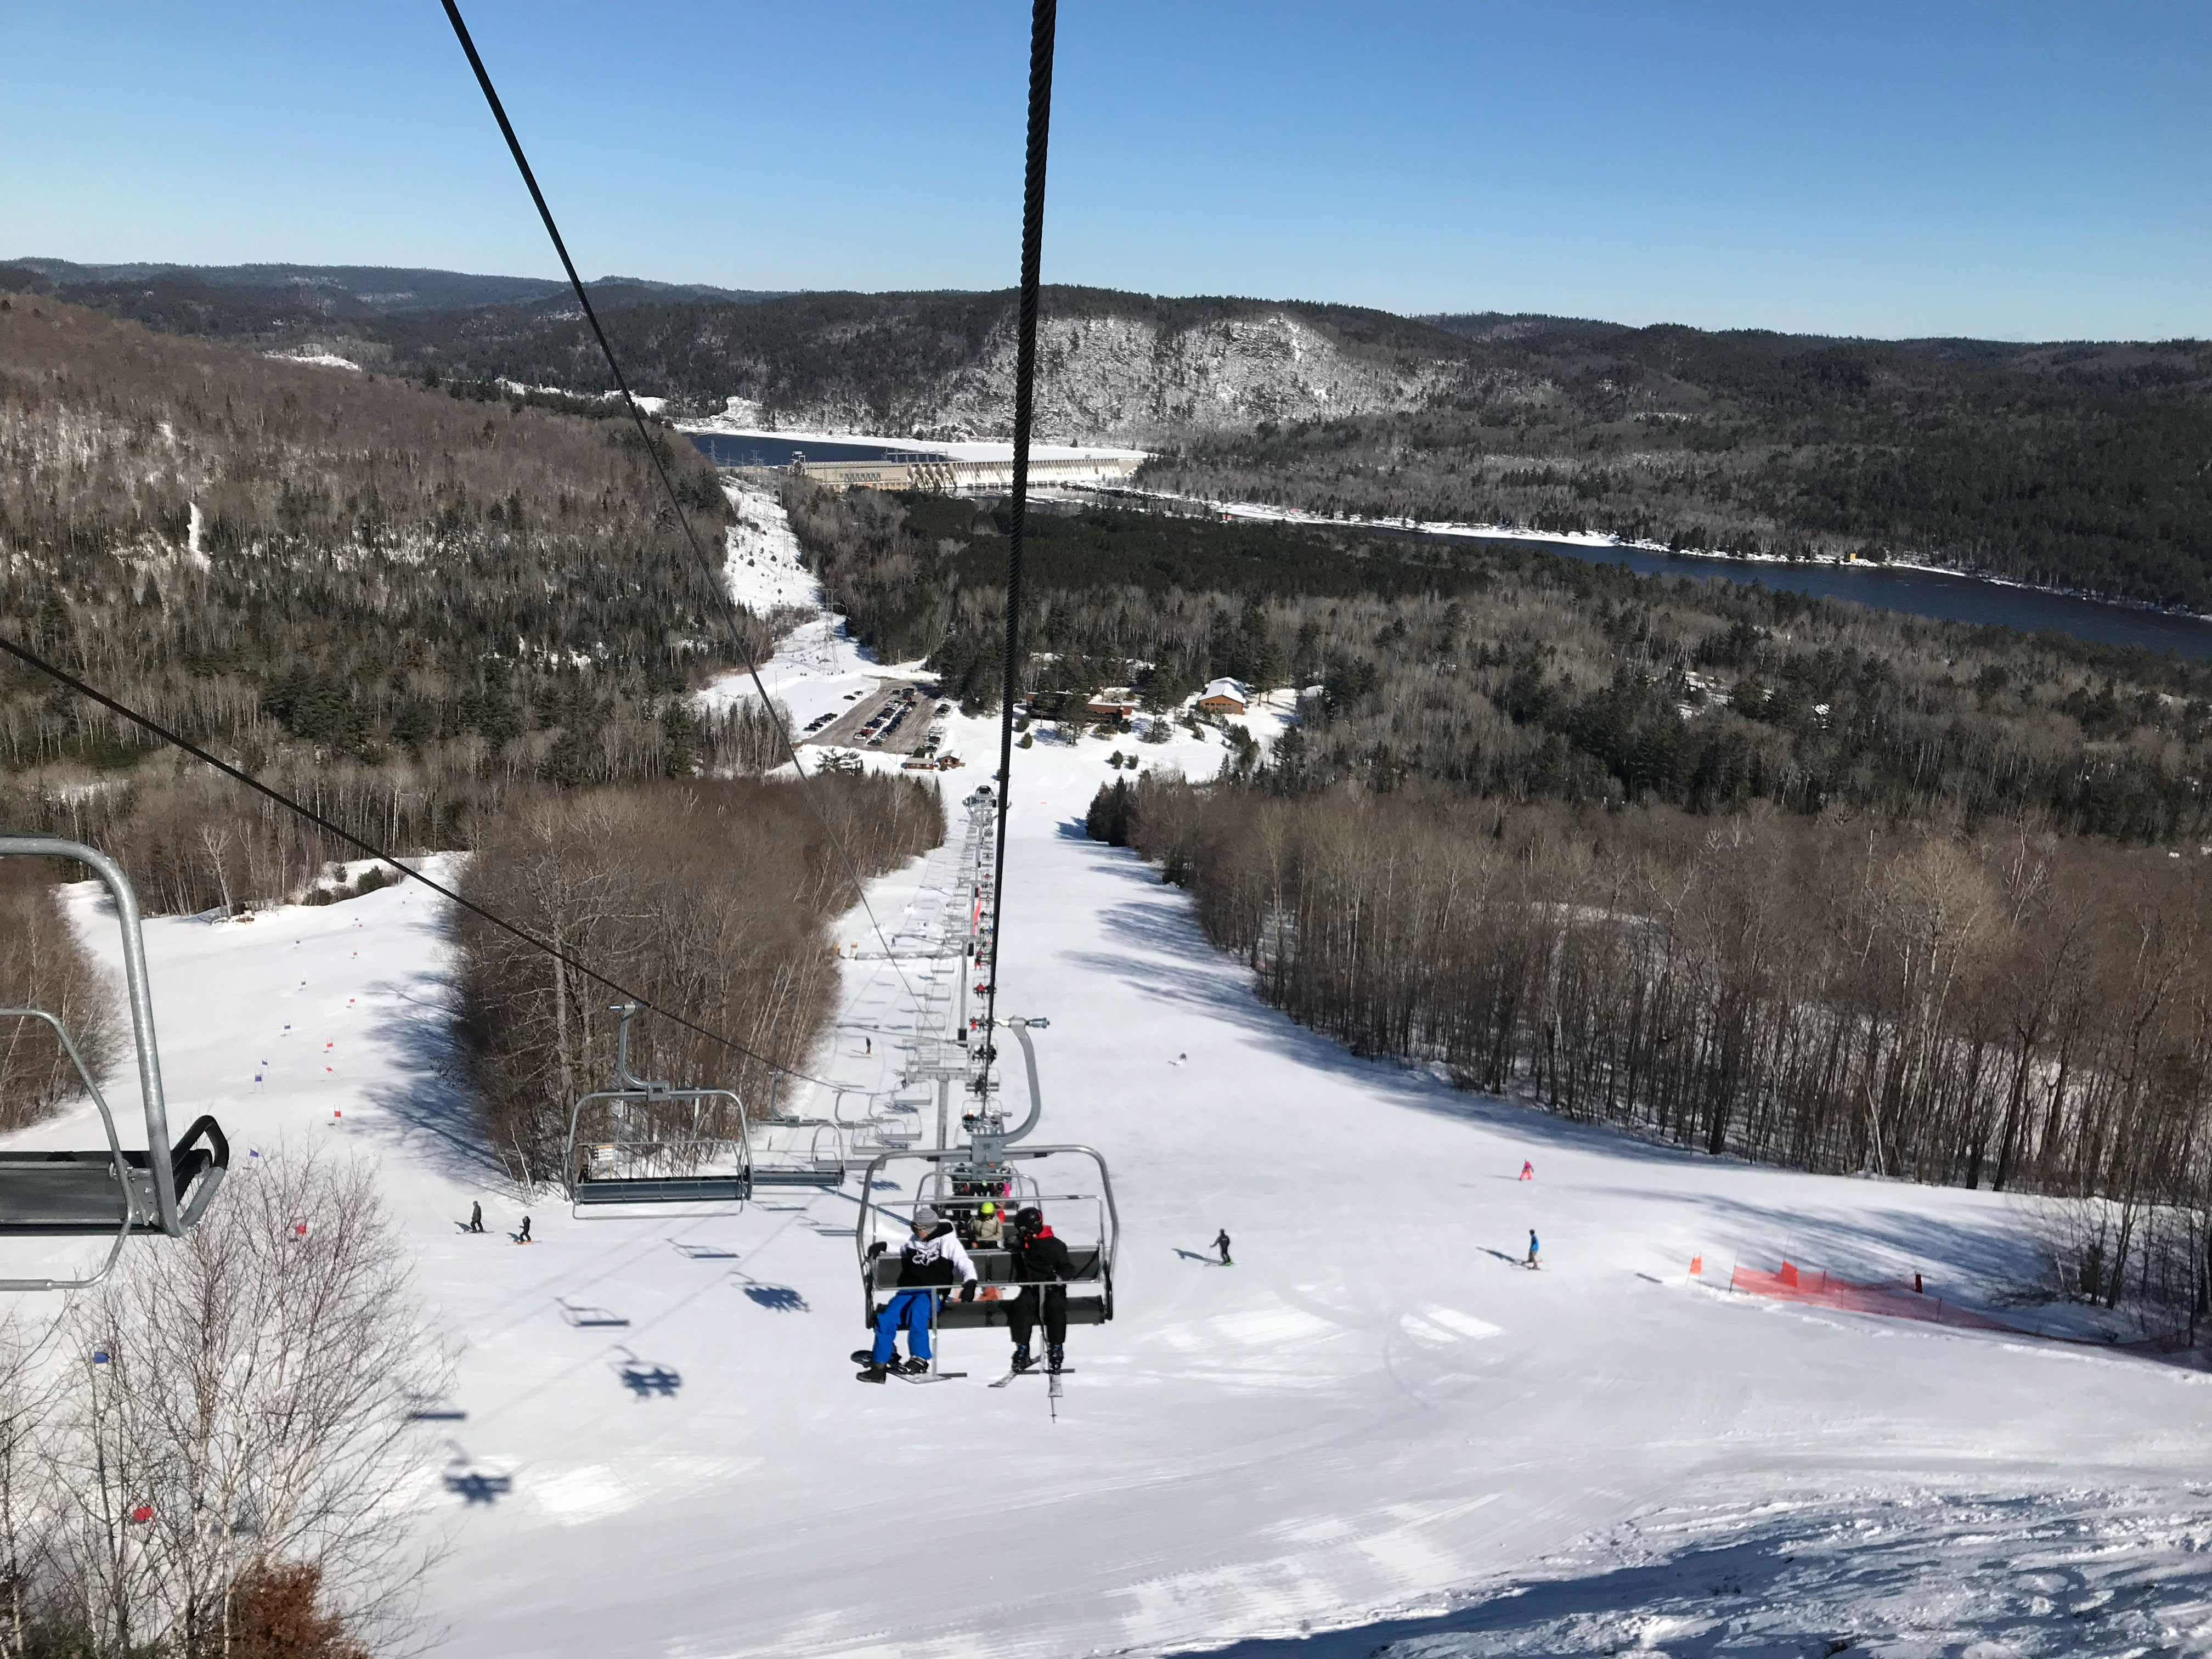 view downslope from the chairlift at Antoine Mountain